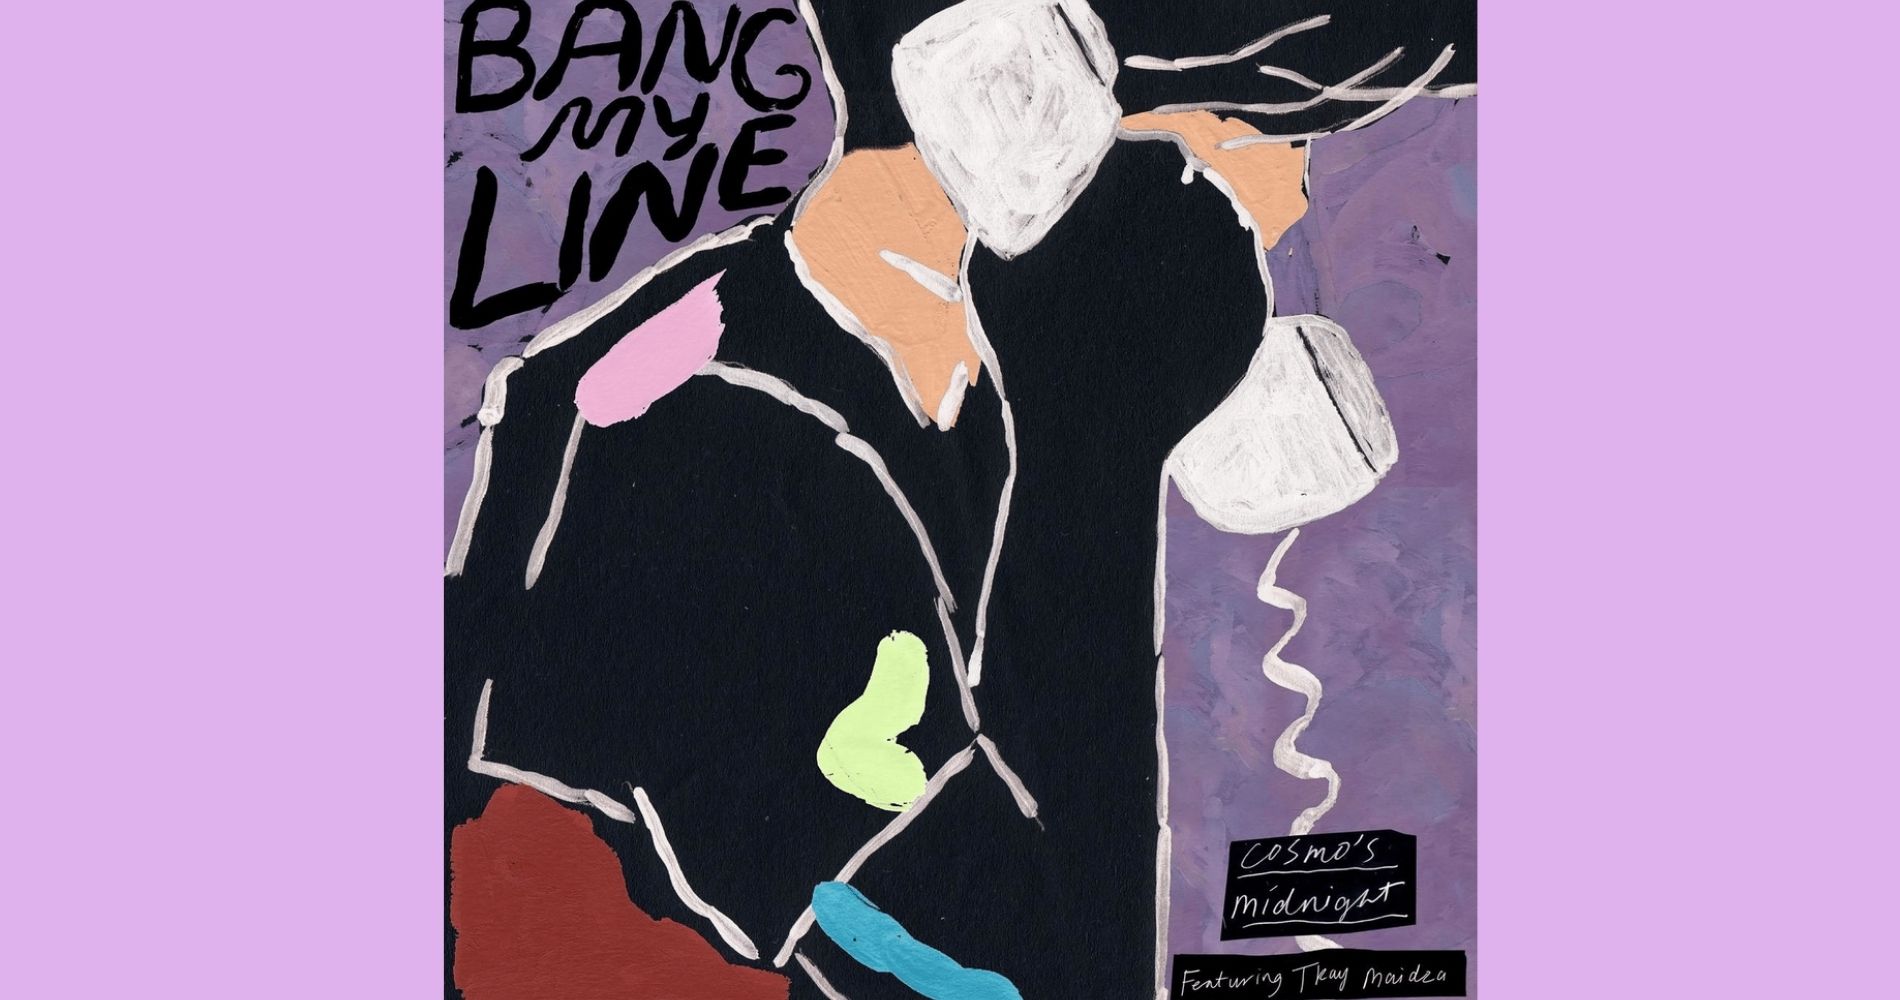 Cosmo's Midnight collaborates with Tkay Maidza for "Bang My Line"